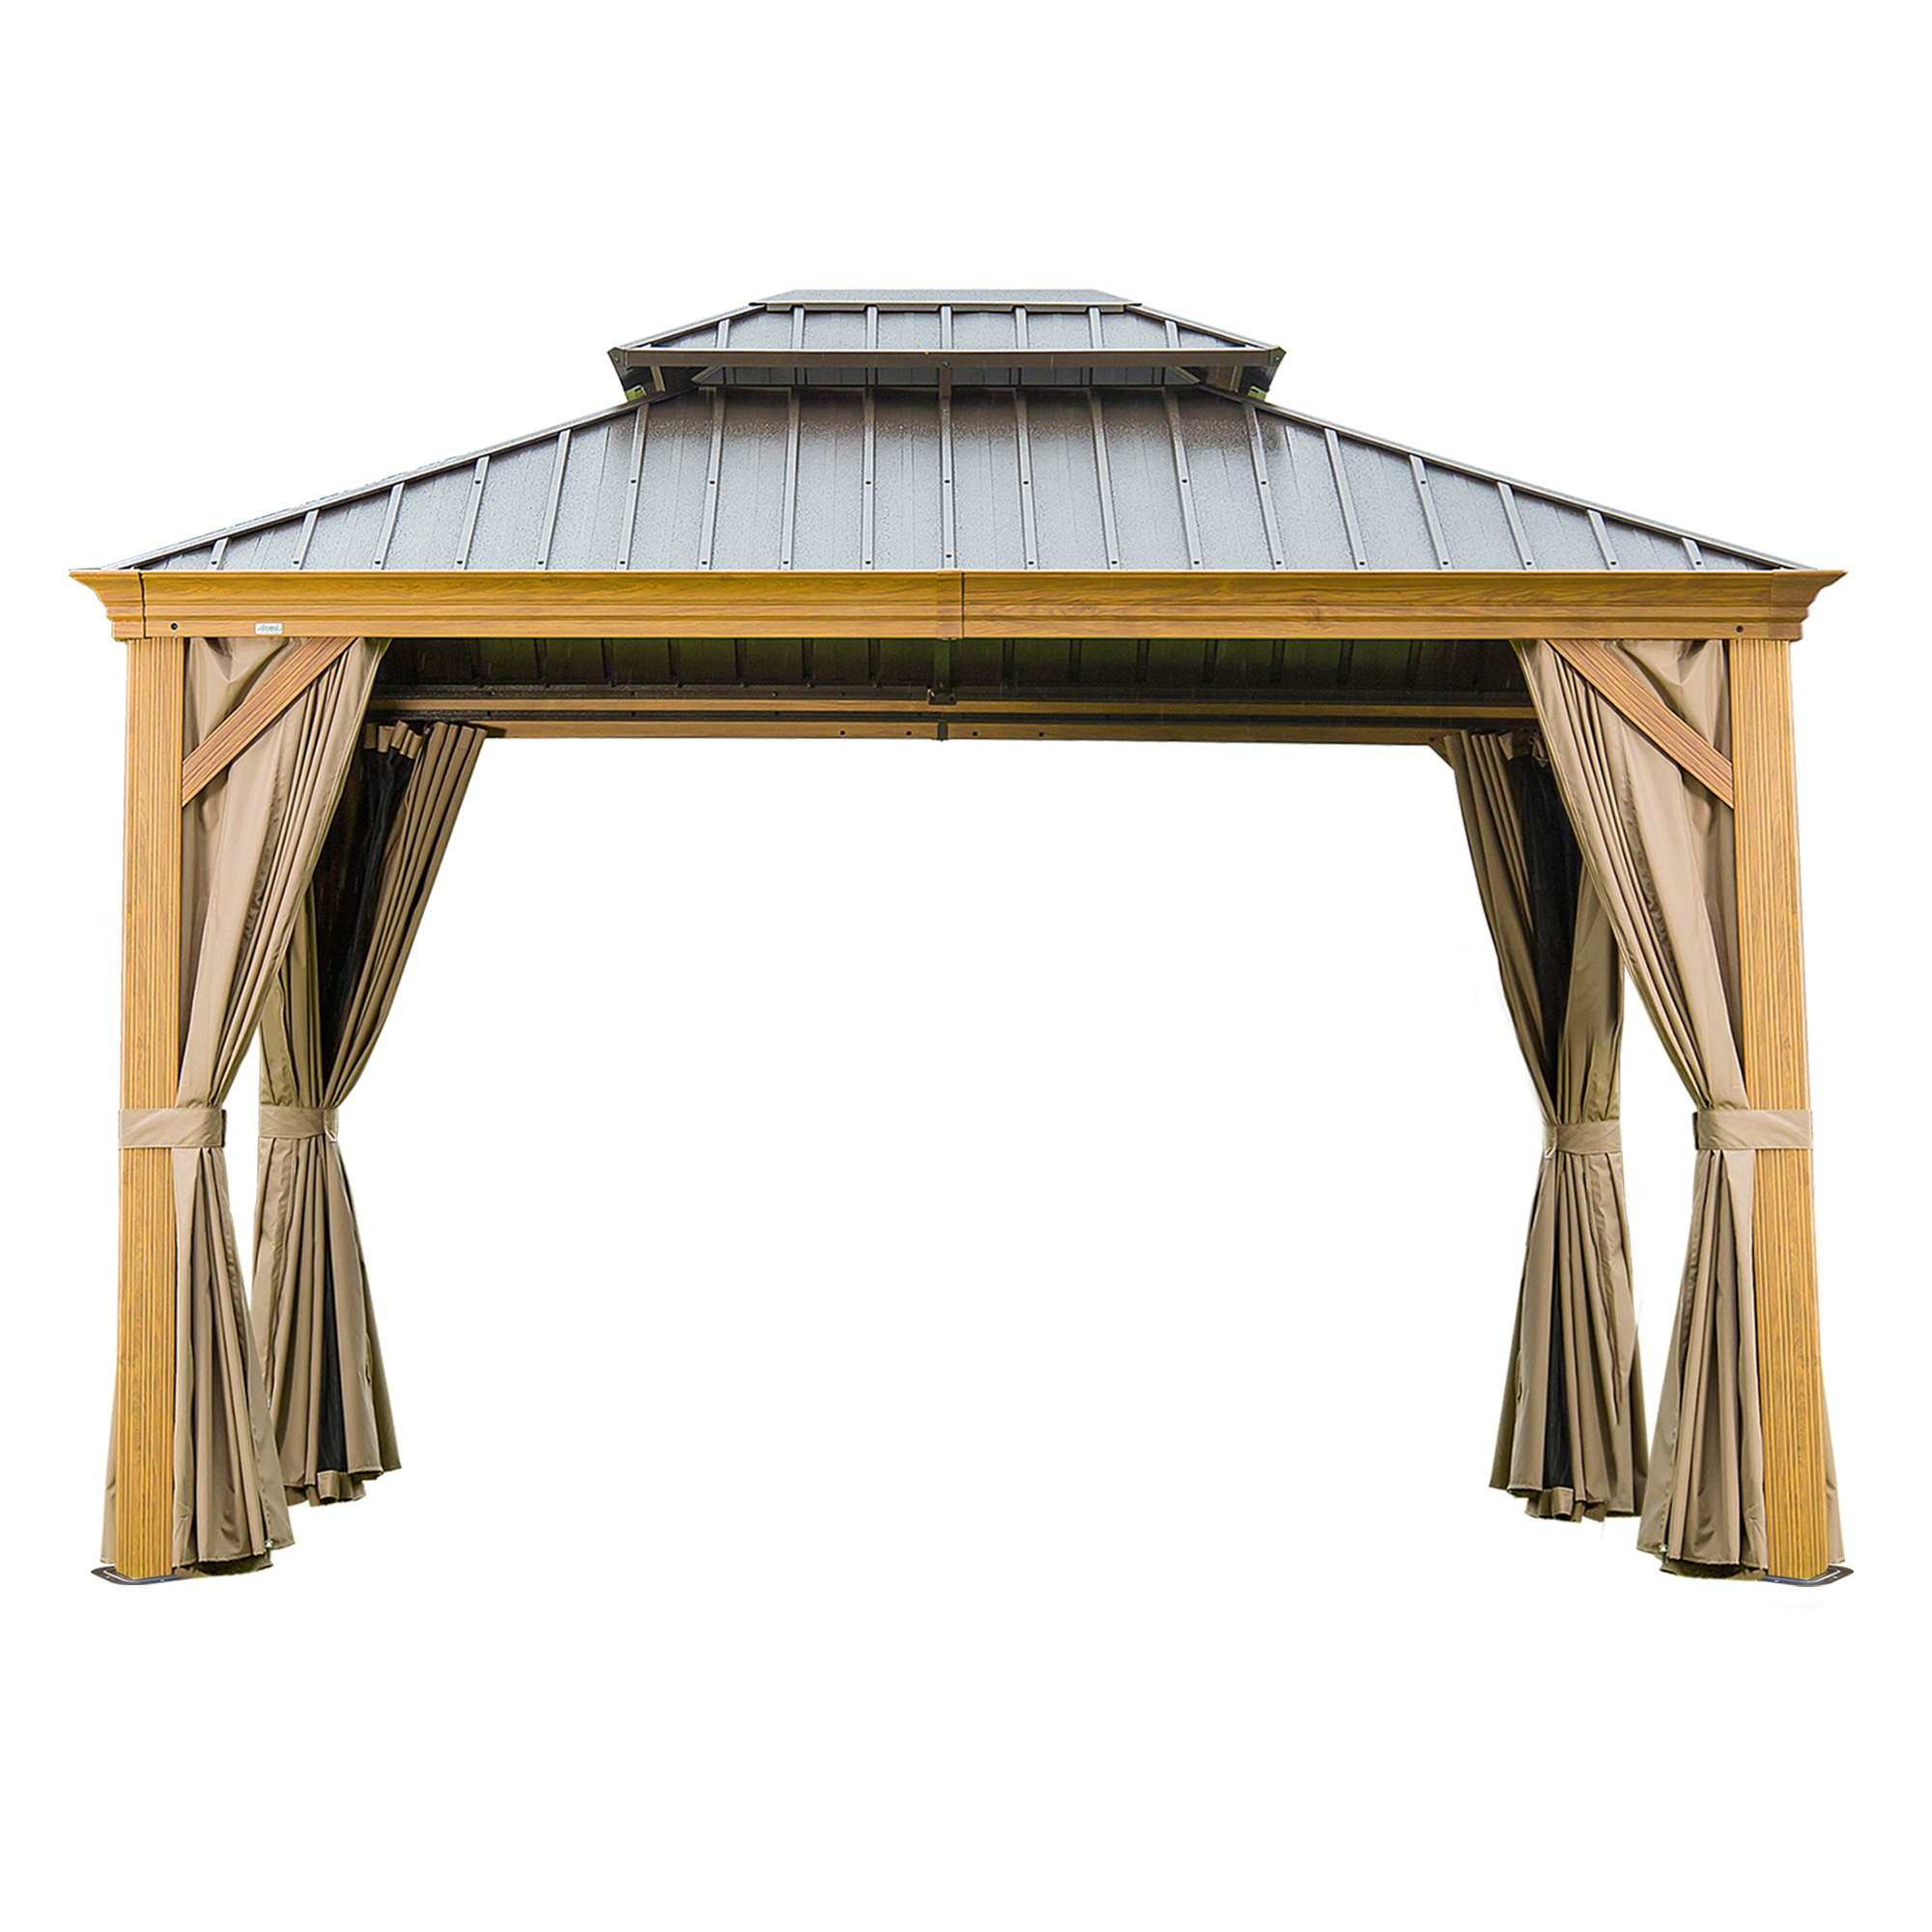 10x12 ft Wood Coated Aluminum Frame Galvanized Steel Double Roof Hardtop Gazebo with Curtains and Netting